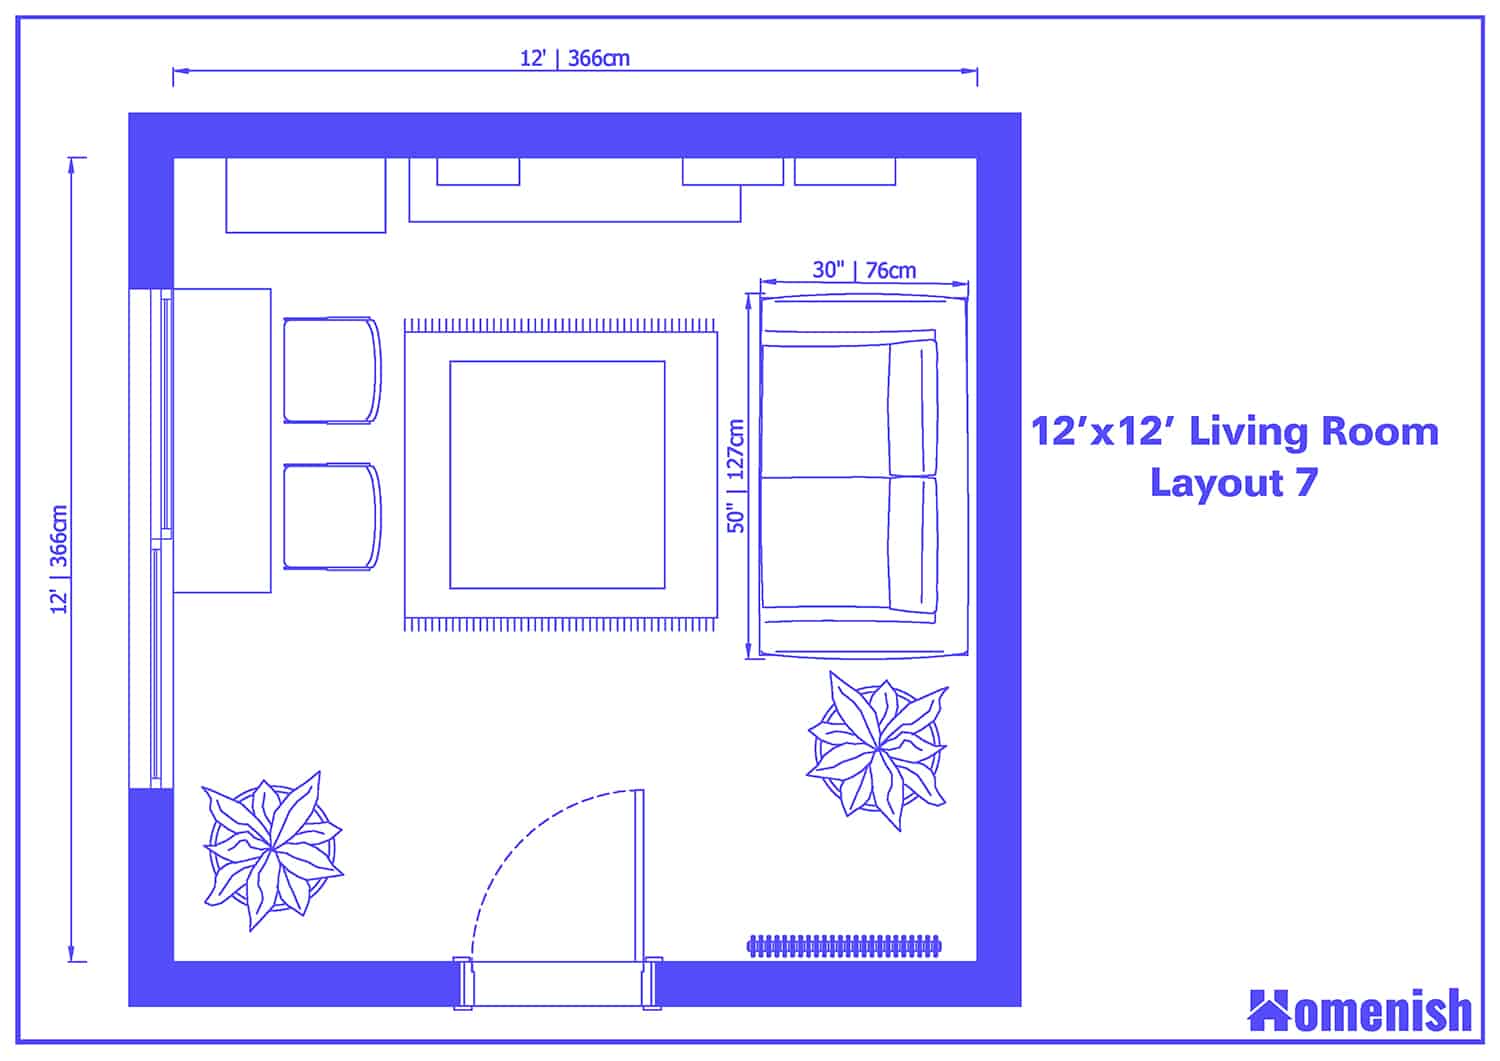 11 X 12 Living Room Layout